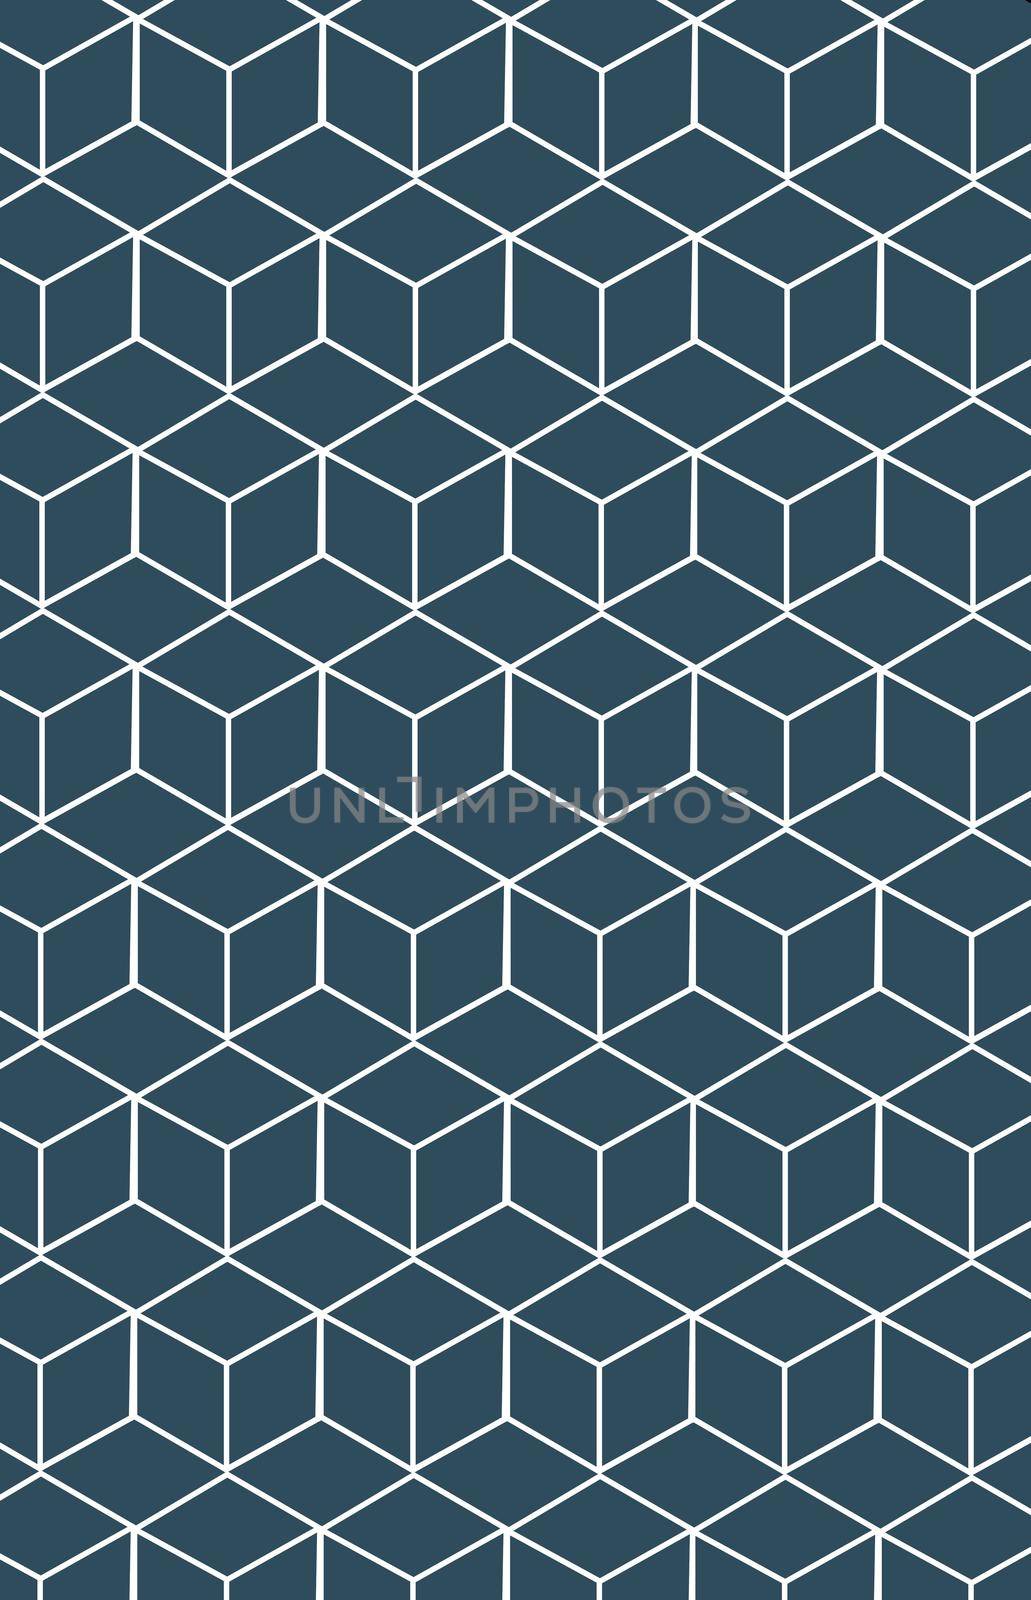 Pattern with geometric cube pattern. Colors white and dark blue